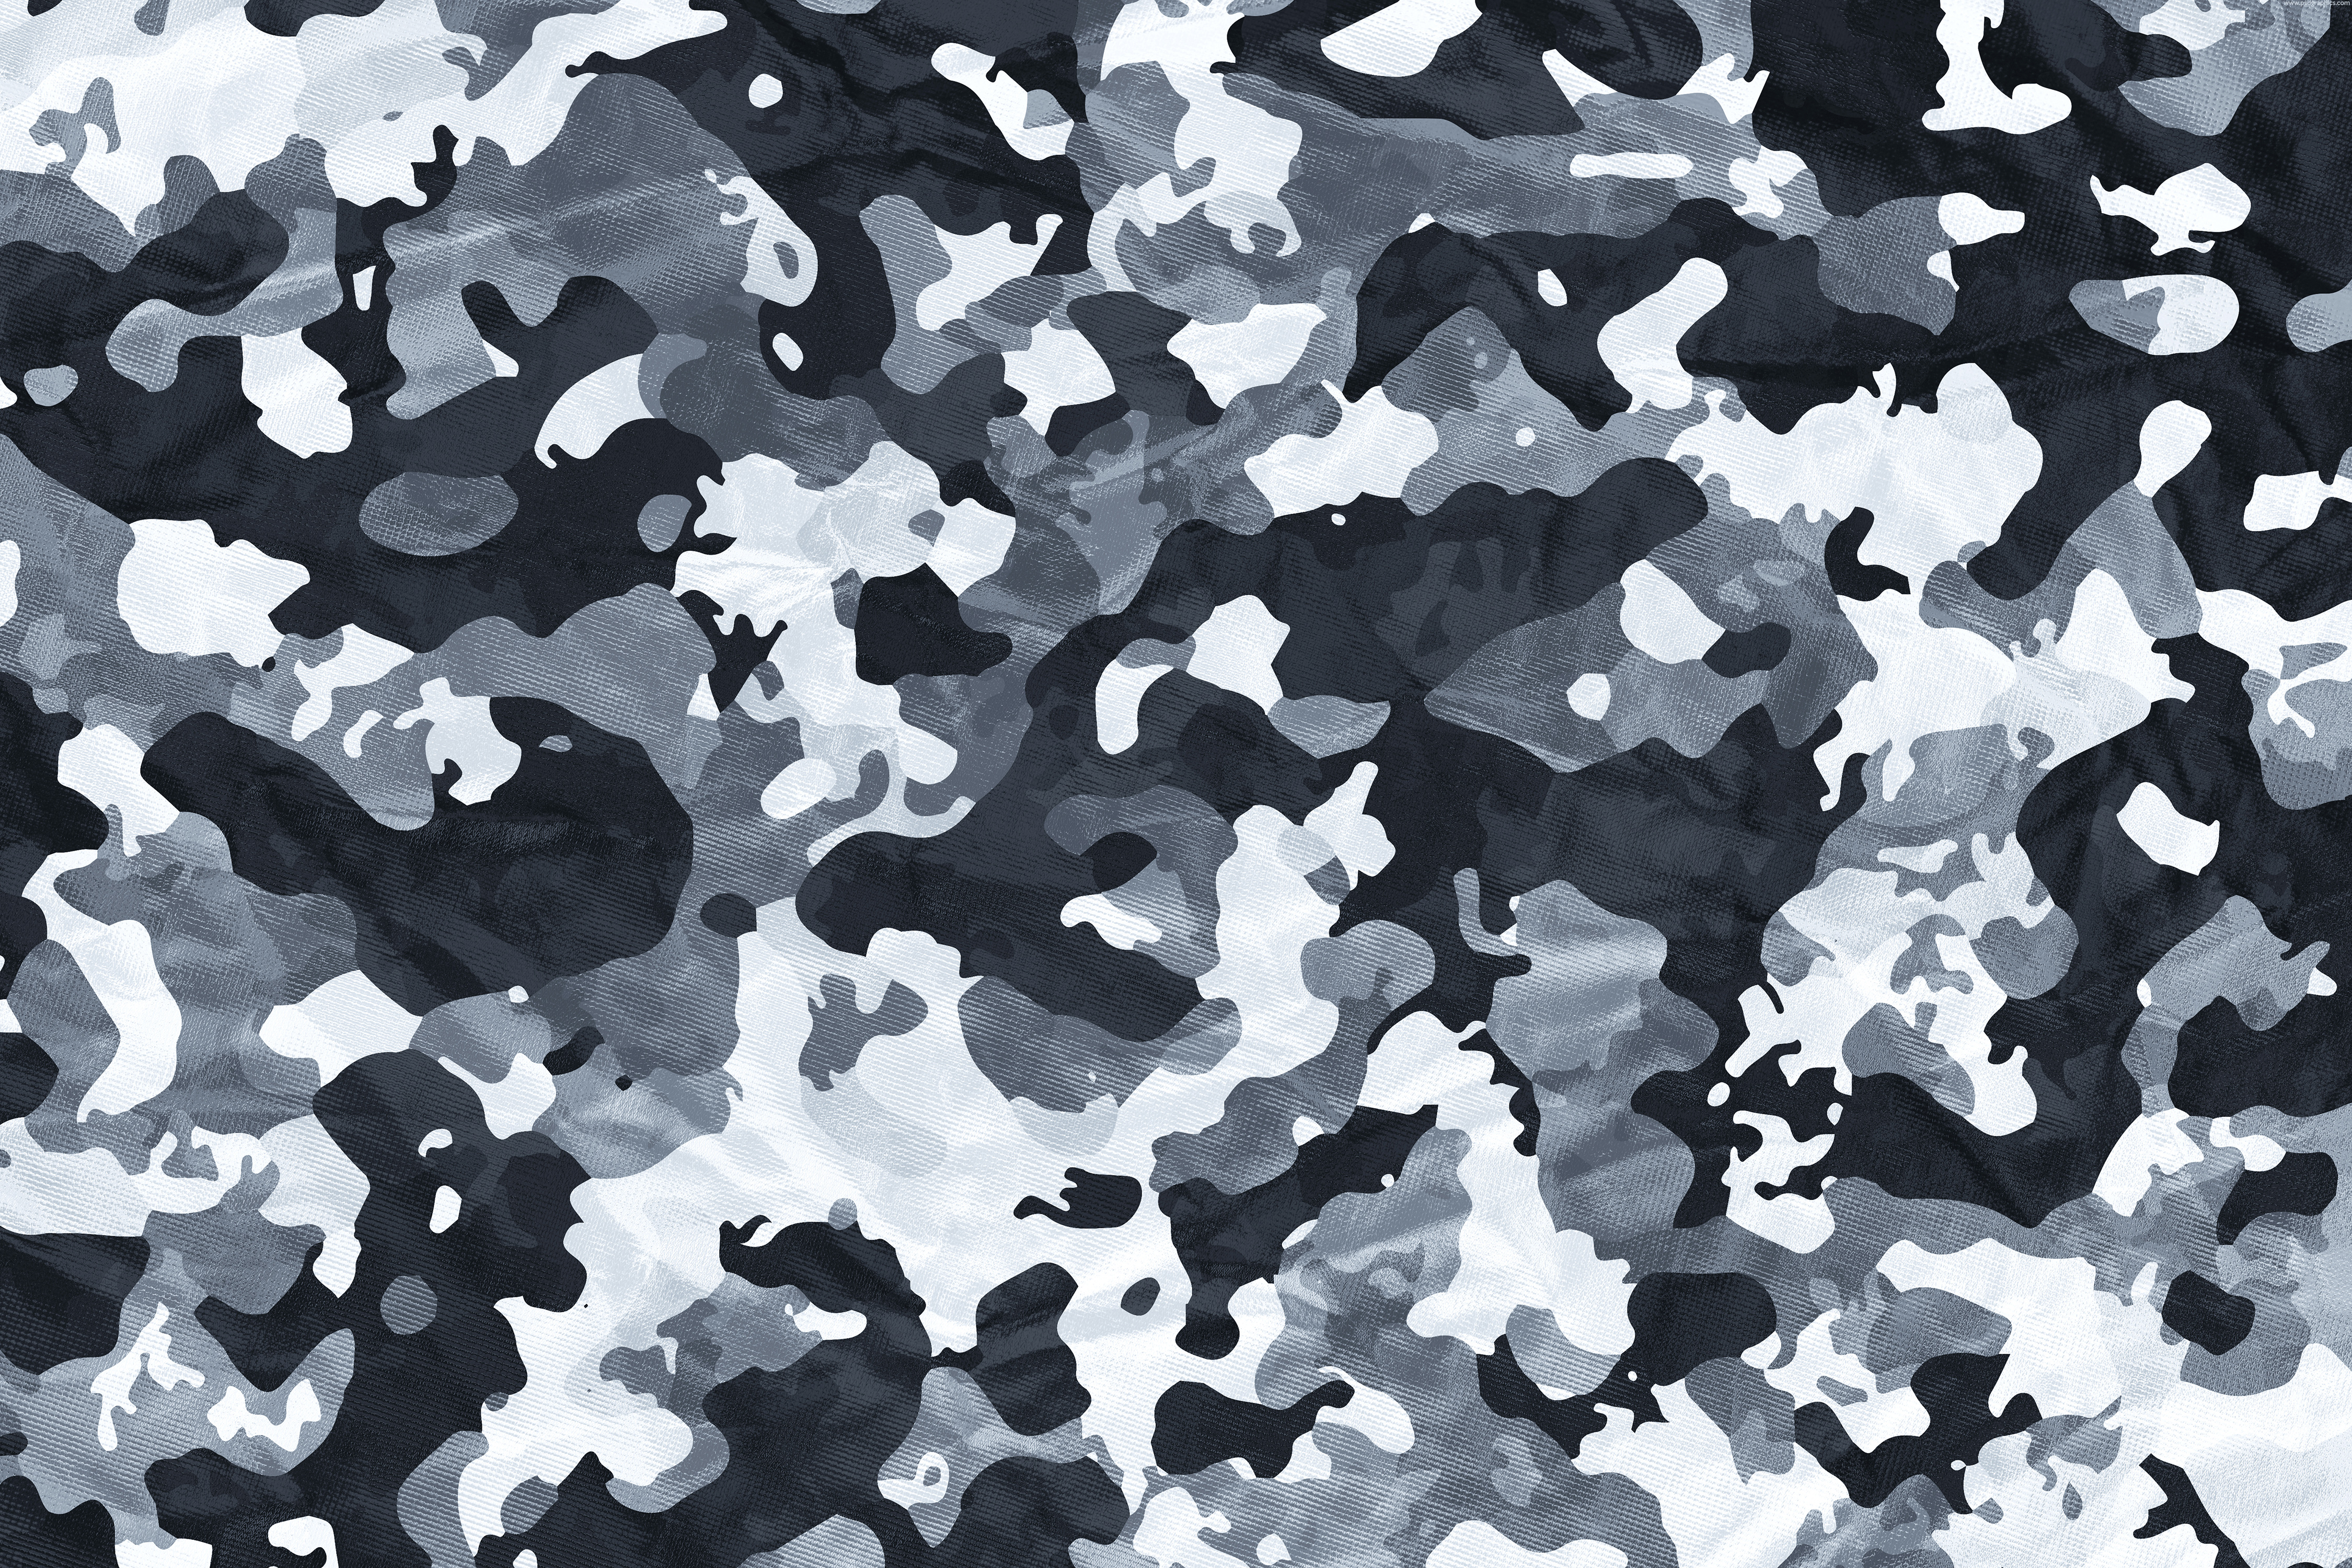 Windows Backgrounds camouflage, military